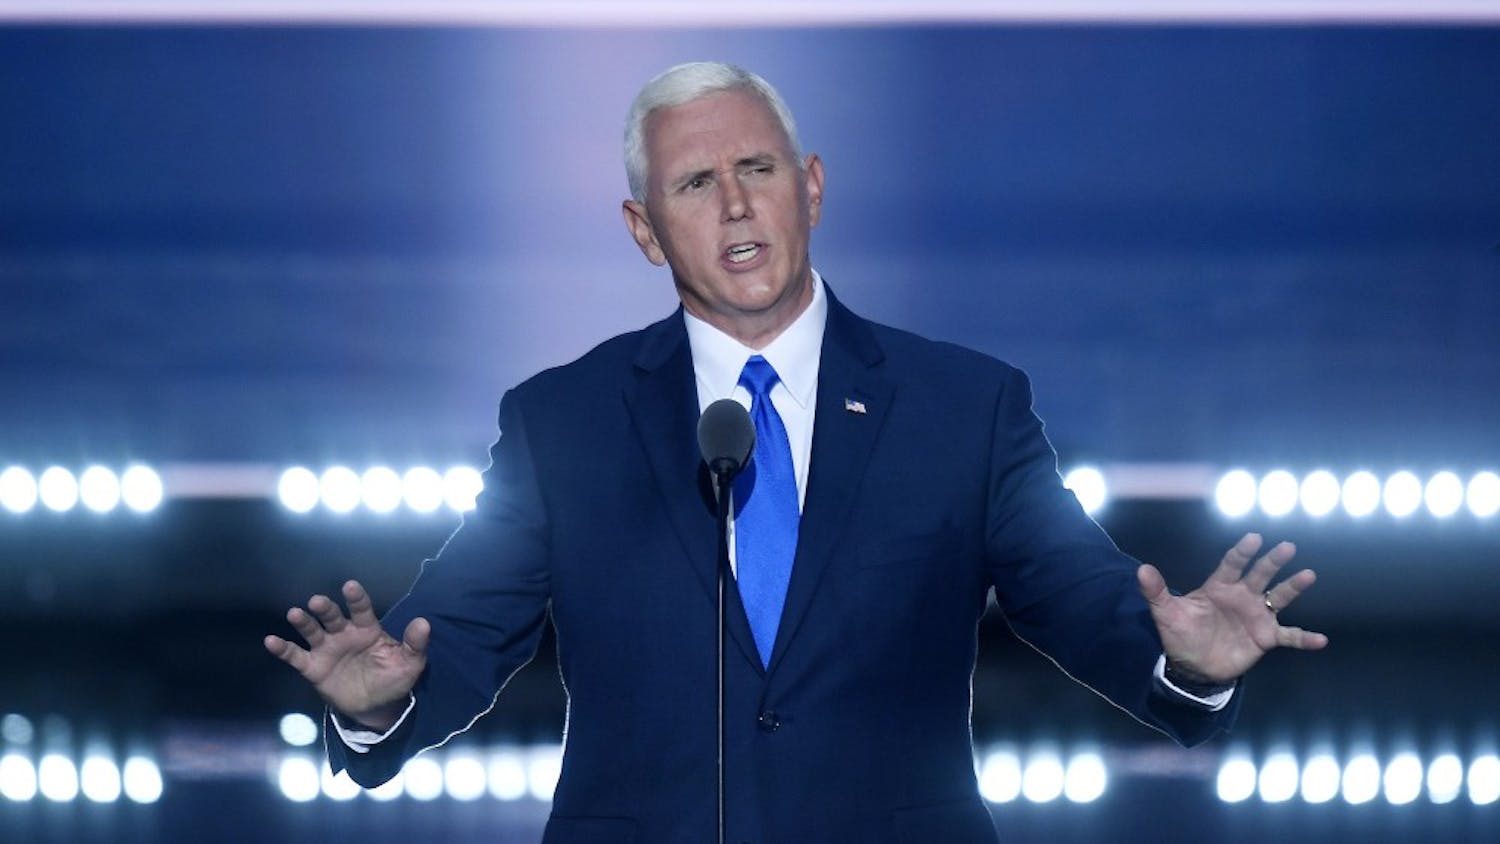 Vice presidential nominee Mike Pence speaks on the third day of the Republican National Convention at Quicken Loans Arena in Cleveland on Wednesday, July 20, 2016. (Olivier Douliery/Abaca Press/TNS)